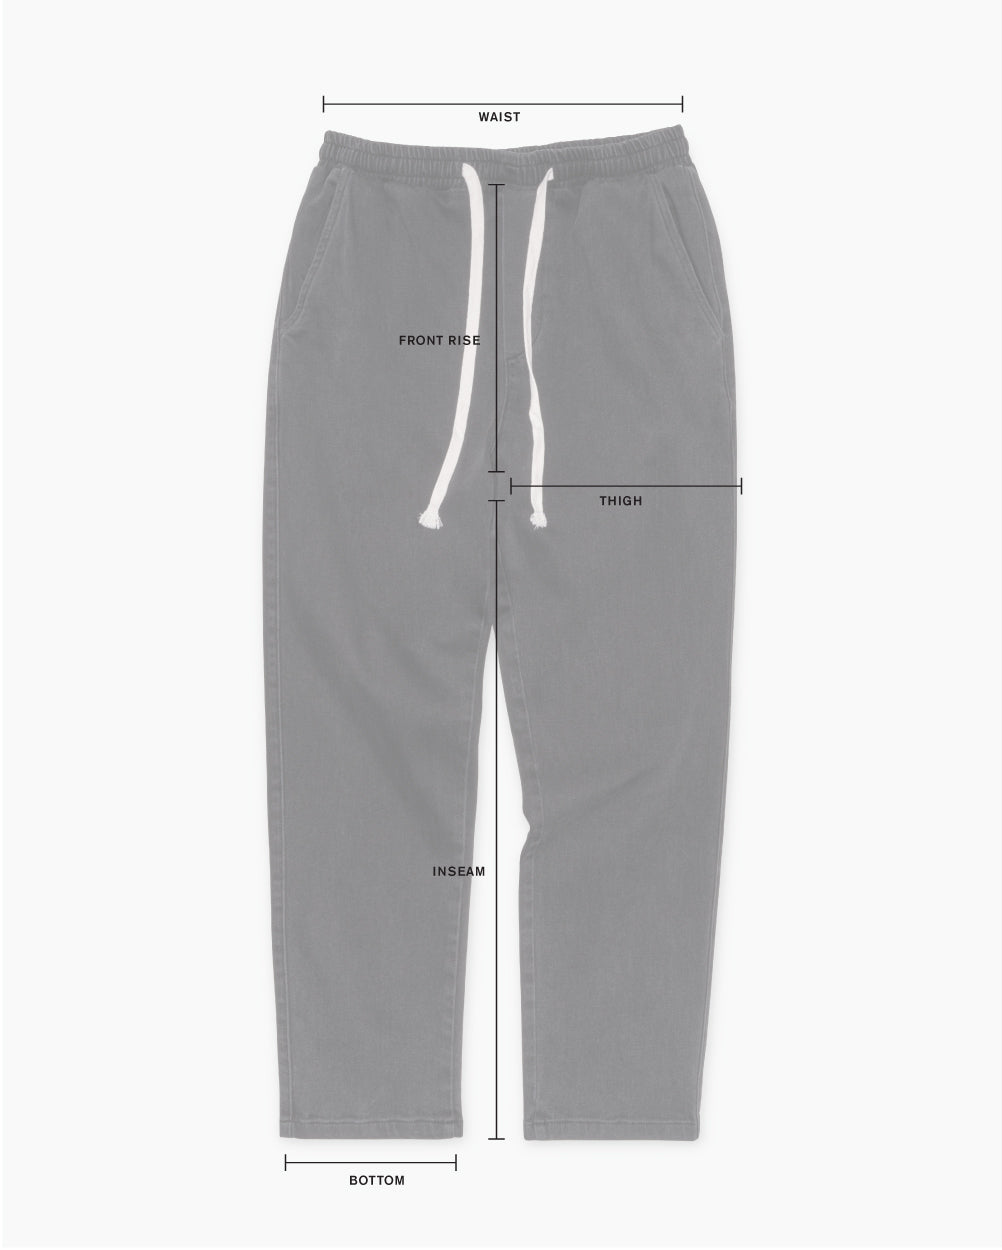 K-SLIM TROUSERS SIZE GUIDE